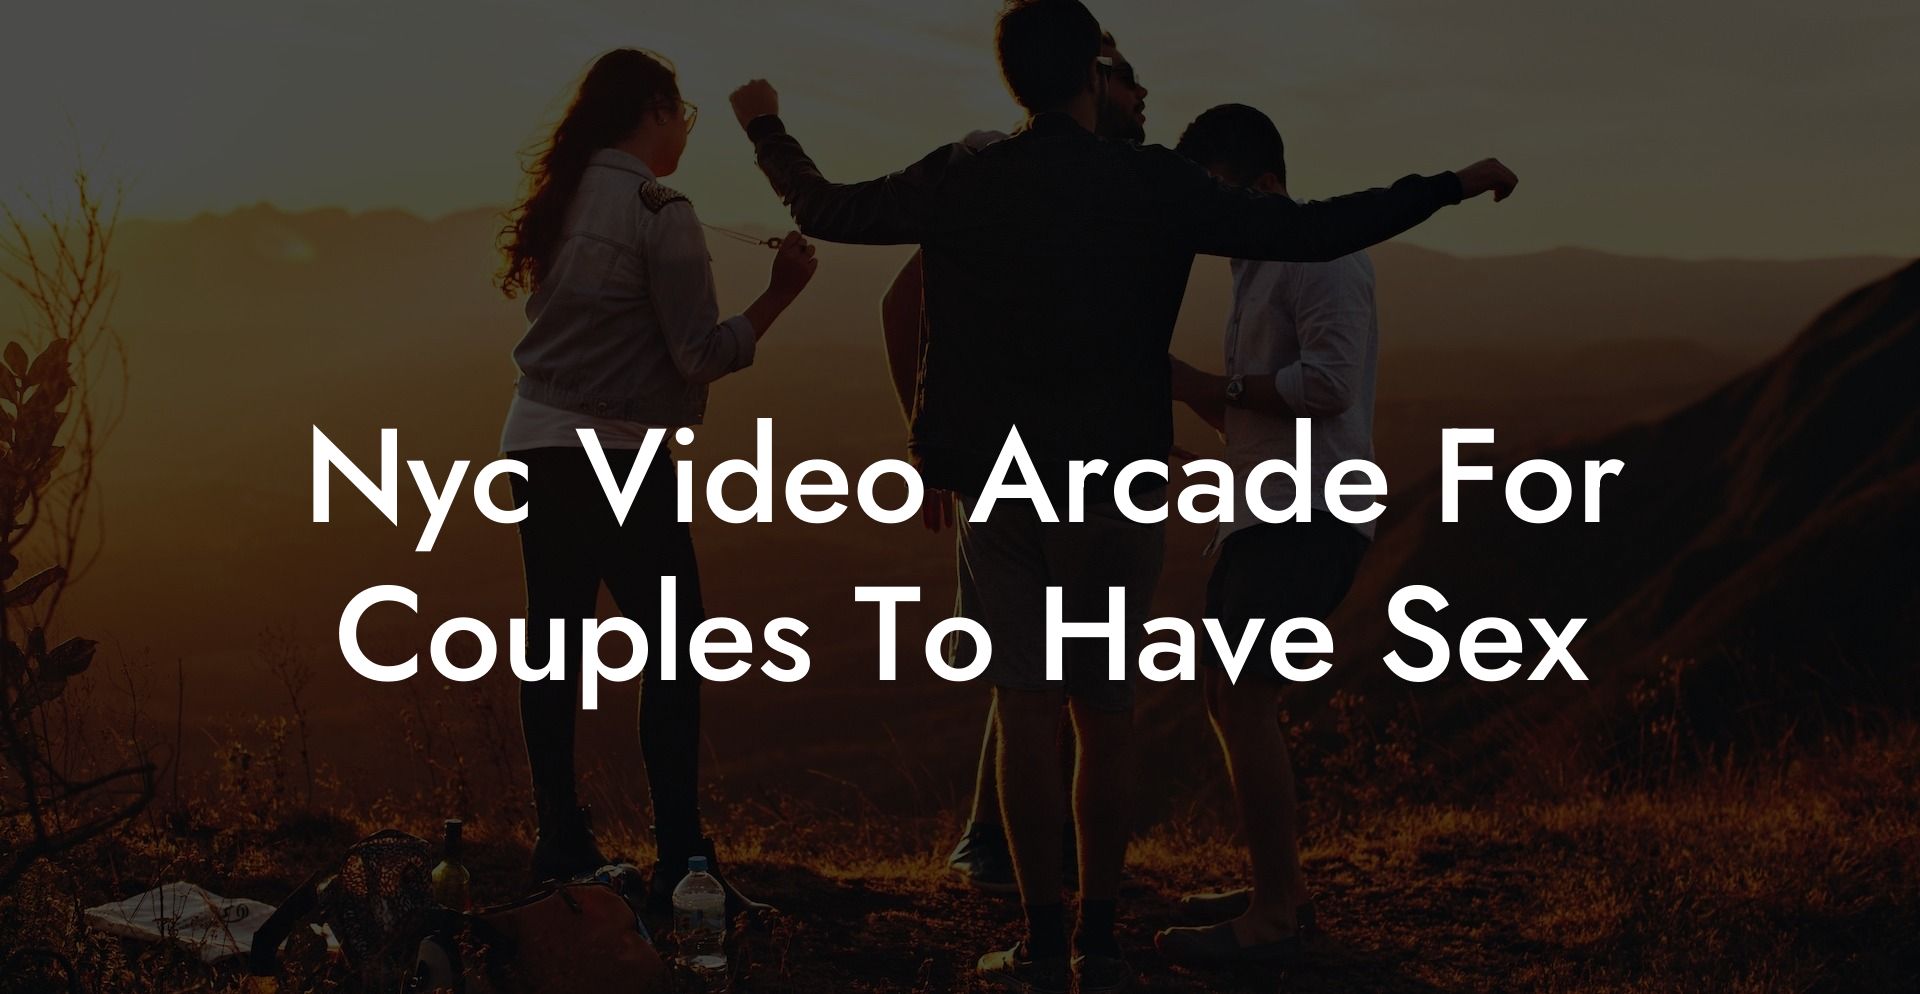 Nyc Video Arcade For Couples To Have Sex